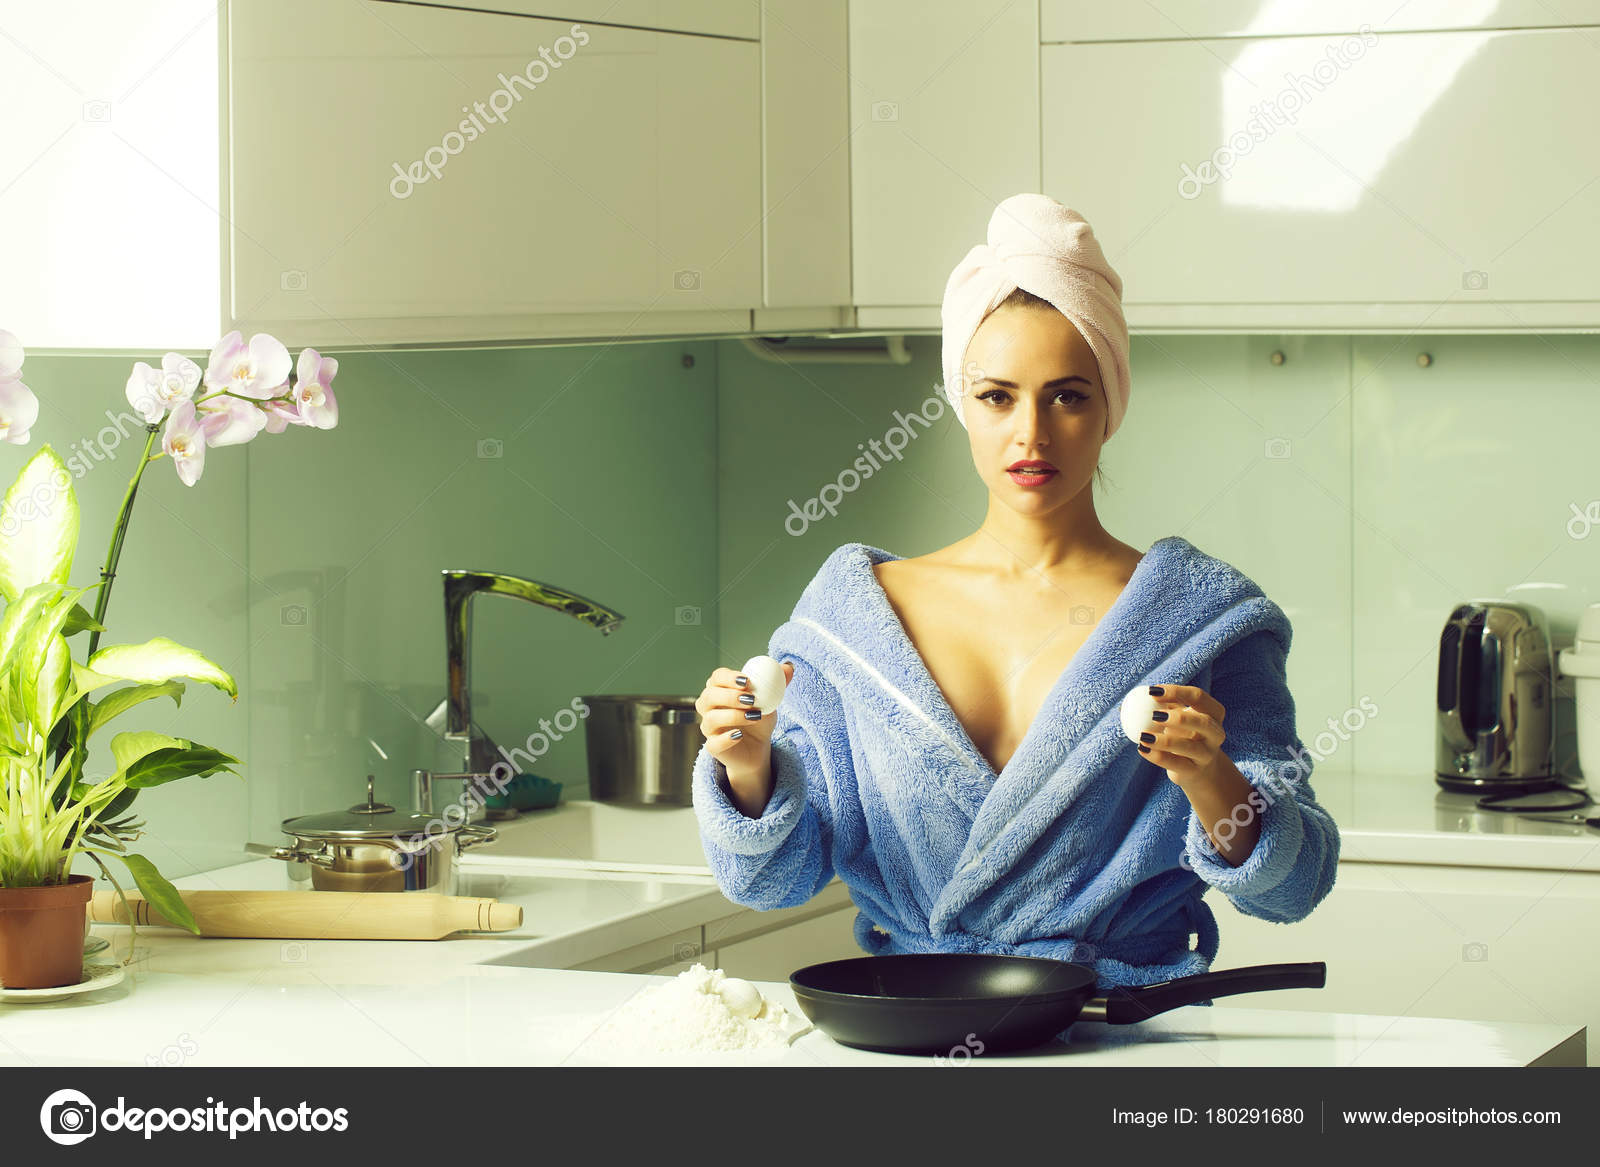 One Sexual Beautiful Sensual Female Housewife Blue Terry Dressing Gown Stock Photo by ©Tverdohlib 180291680